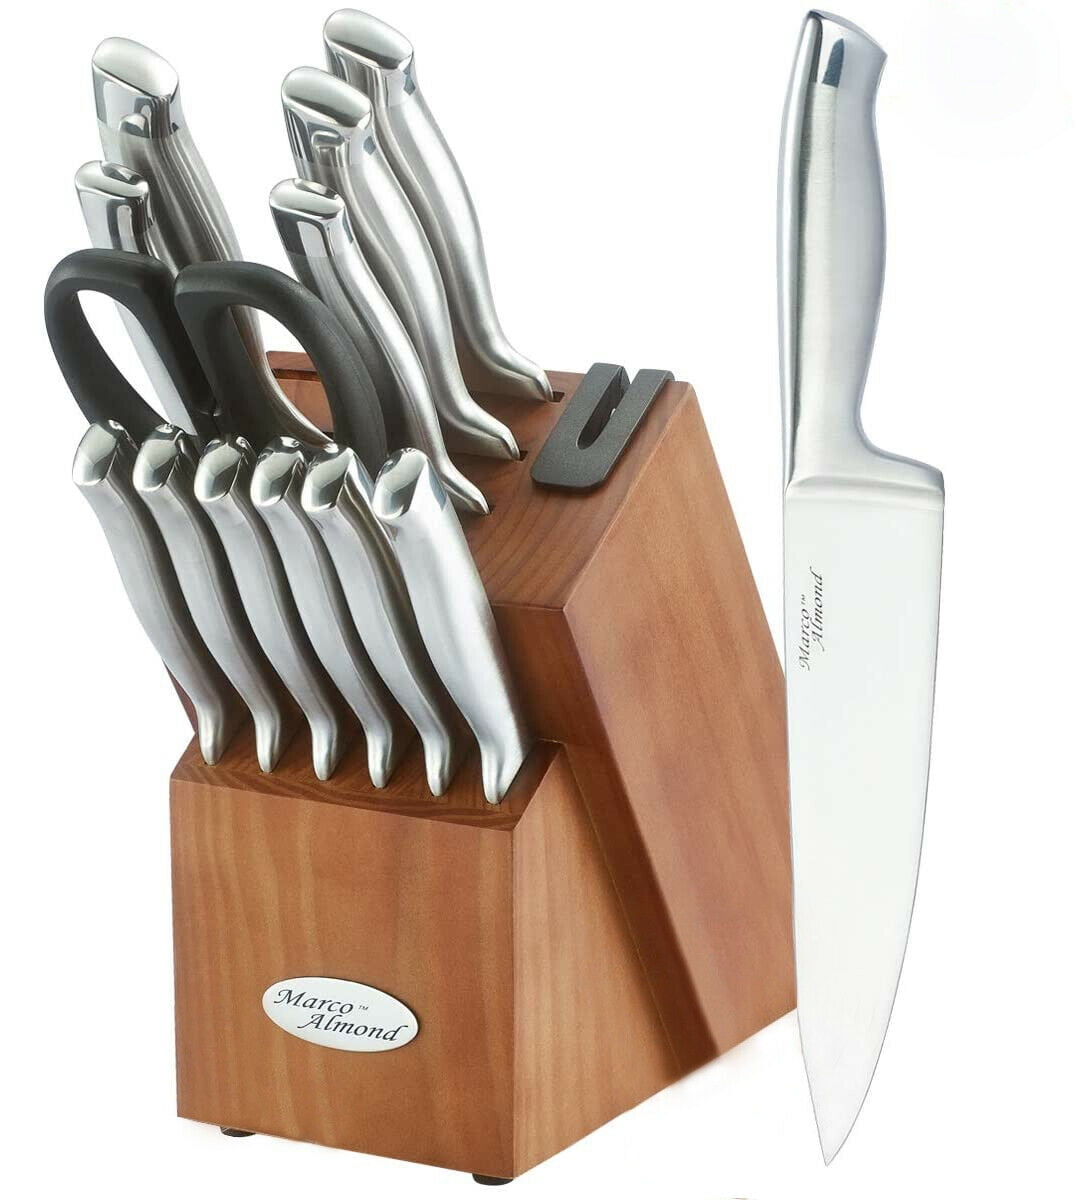 McCook MC27 14 Pieces Stainless Steel Kitchen Knife Set with Wooden Block